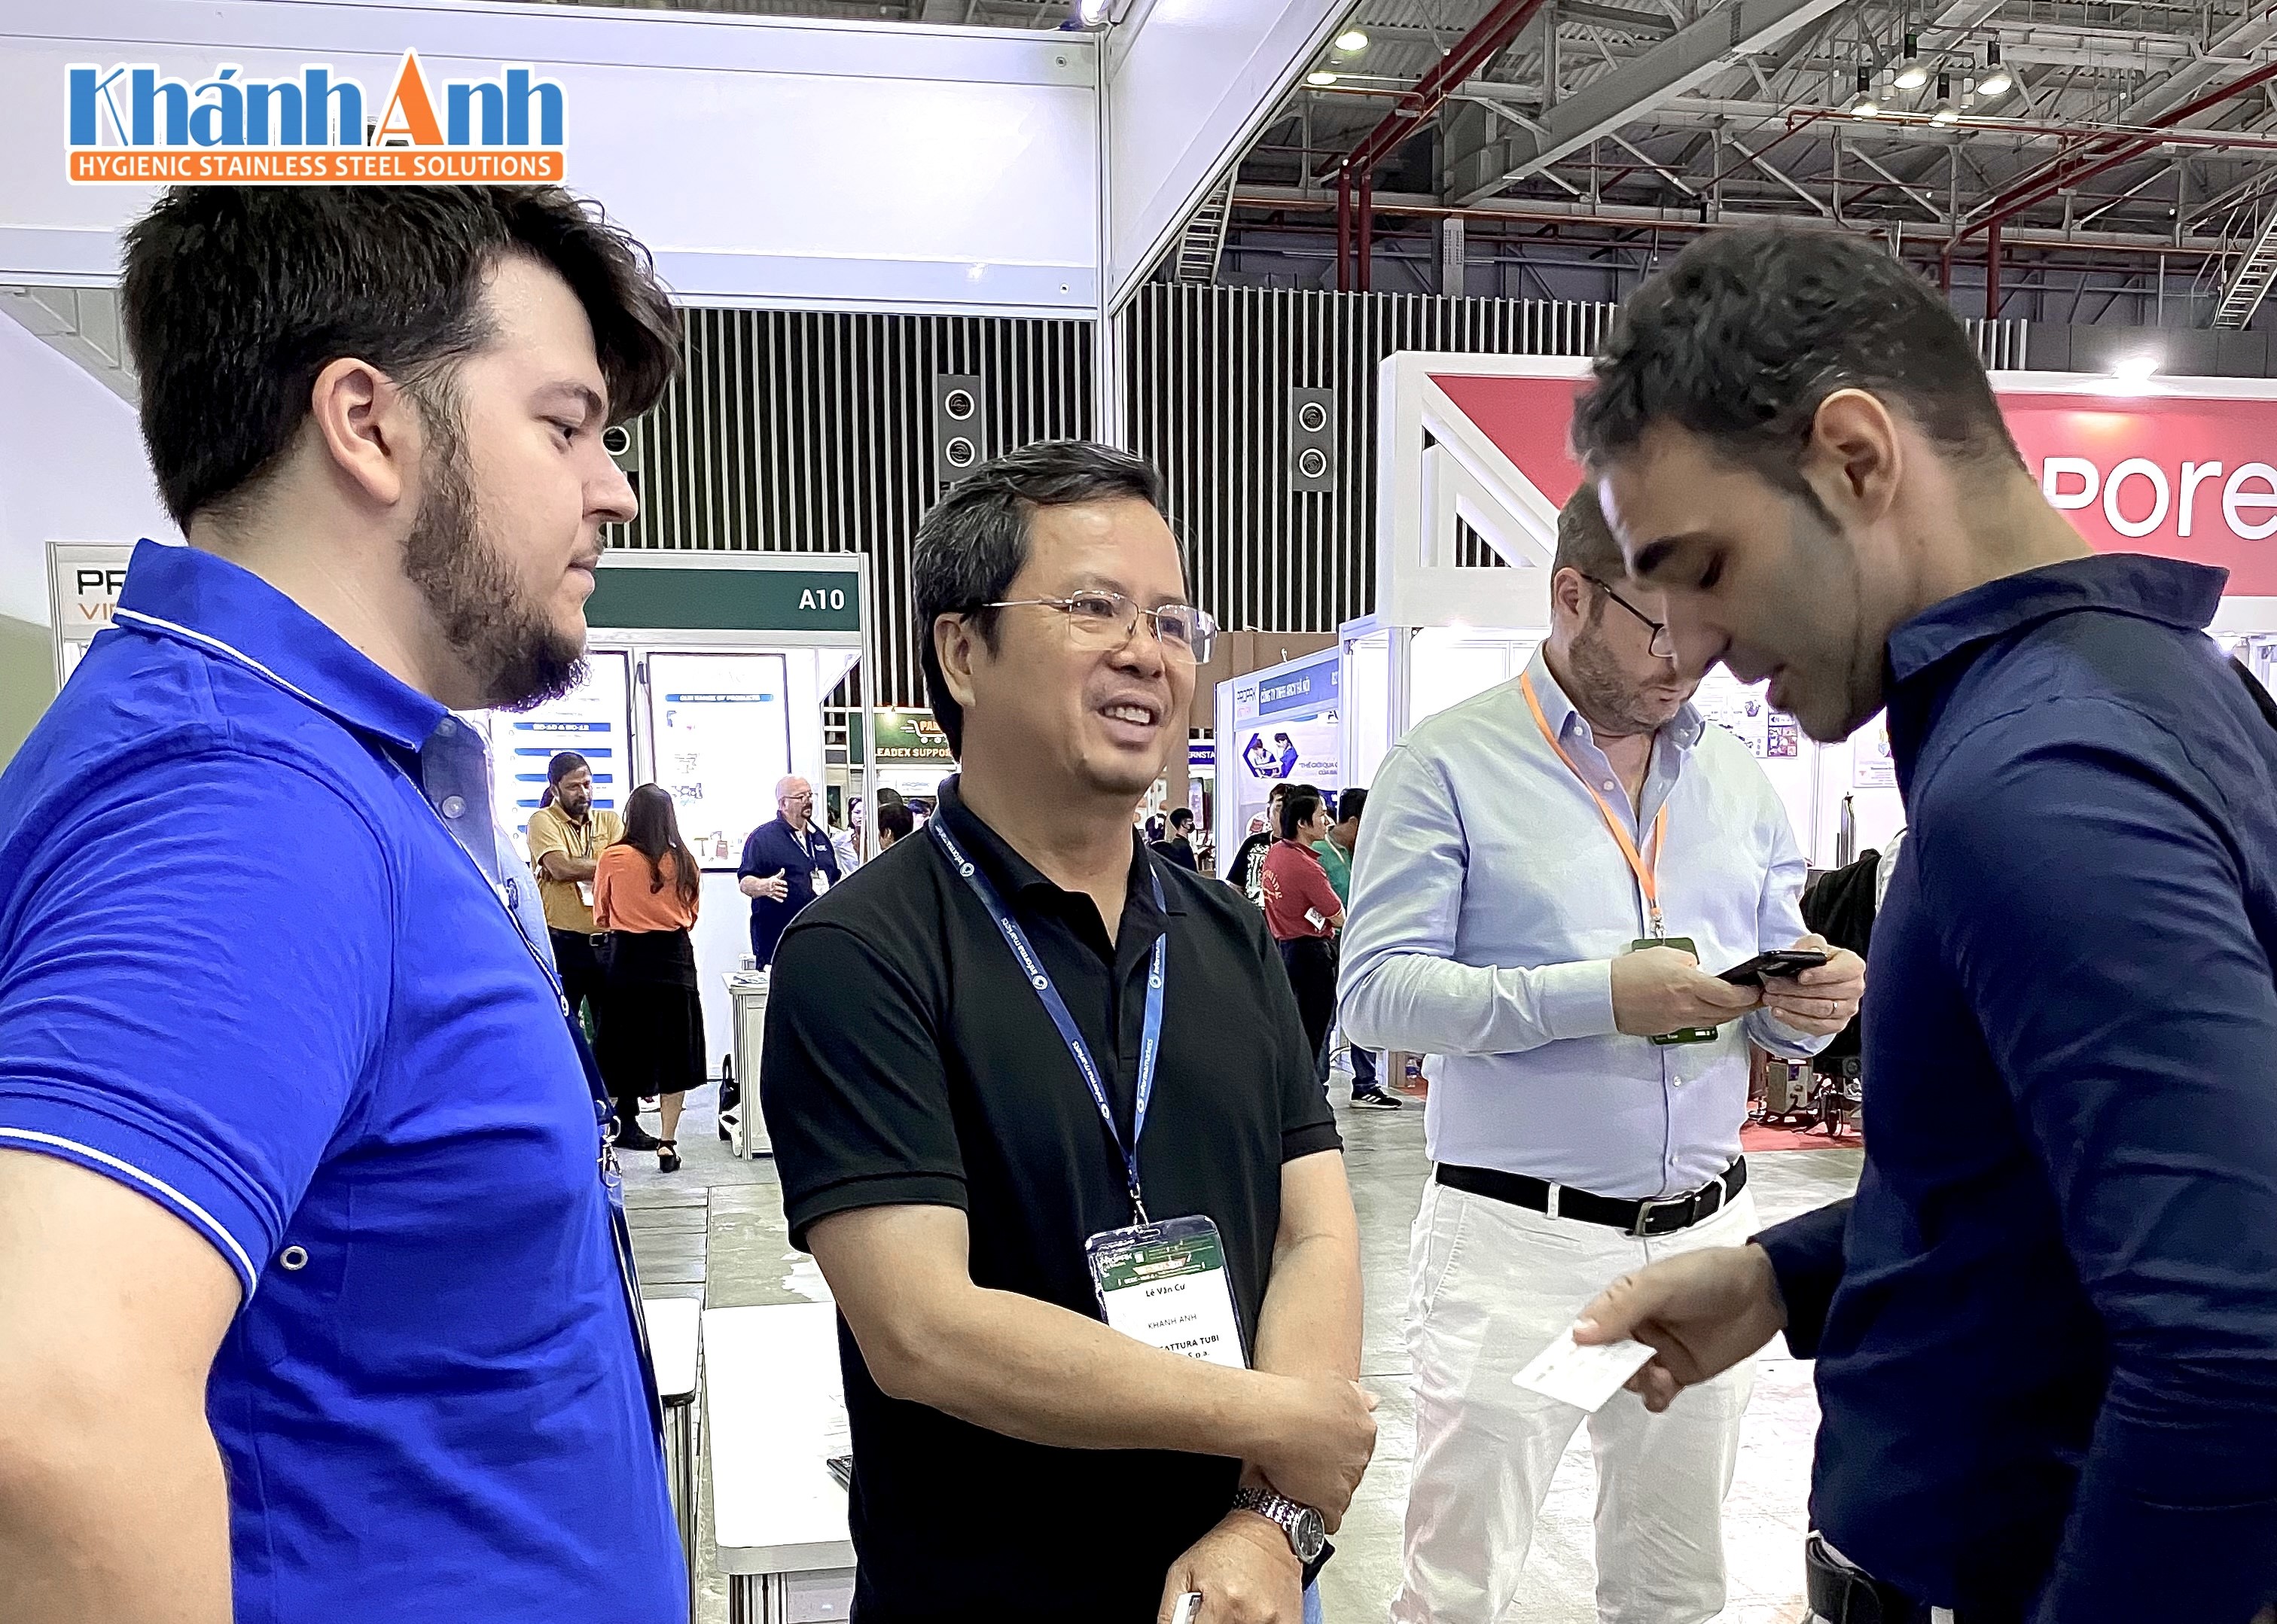 ProPak 2023 exhibition has opened many new business opportunities between Khanh Anh Company and corporate customers both domestic and foreign.